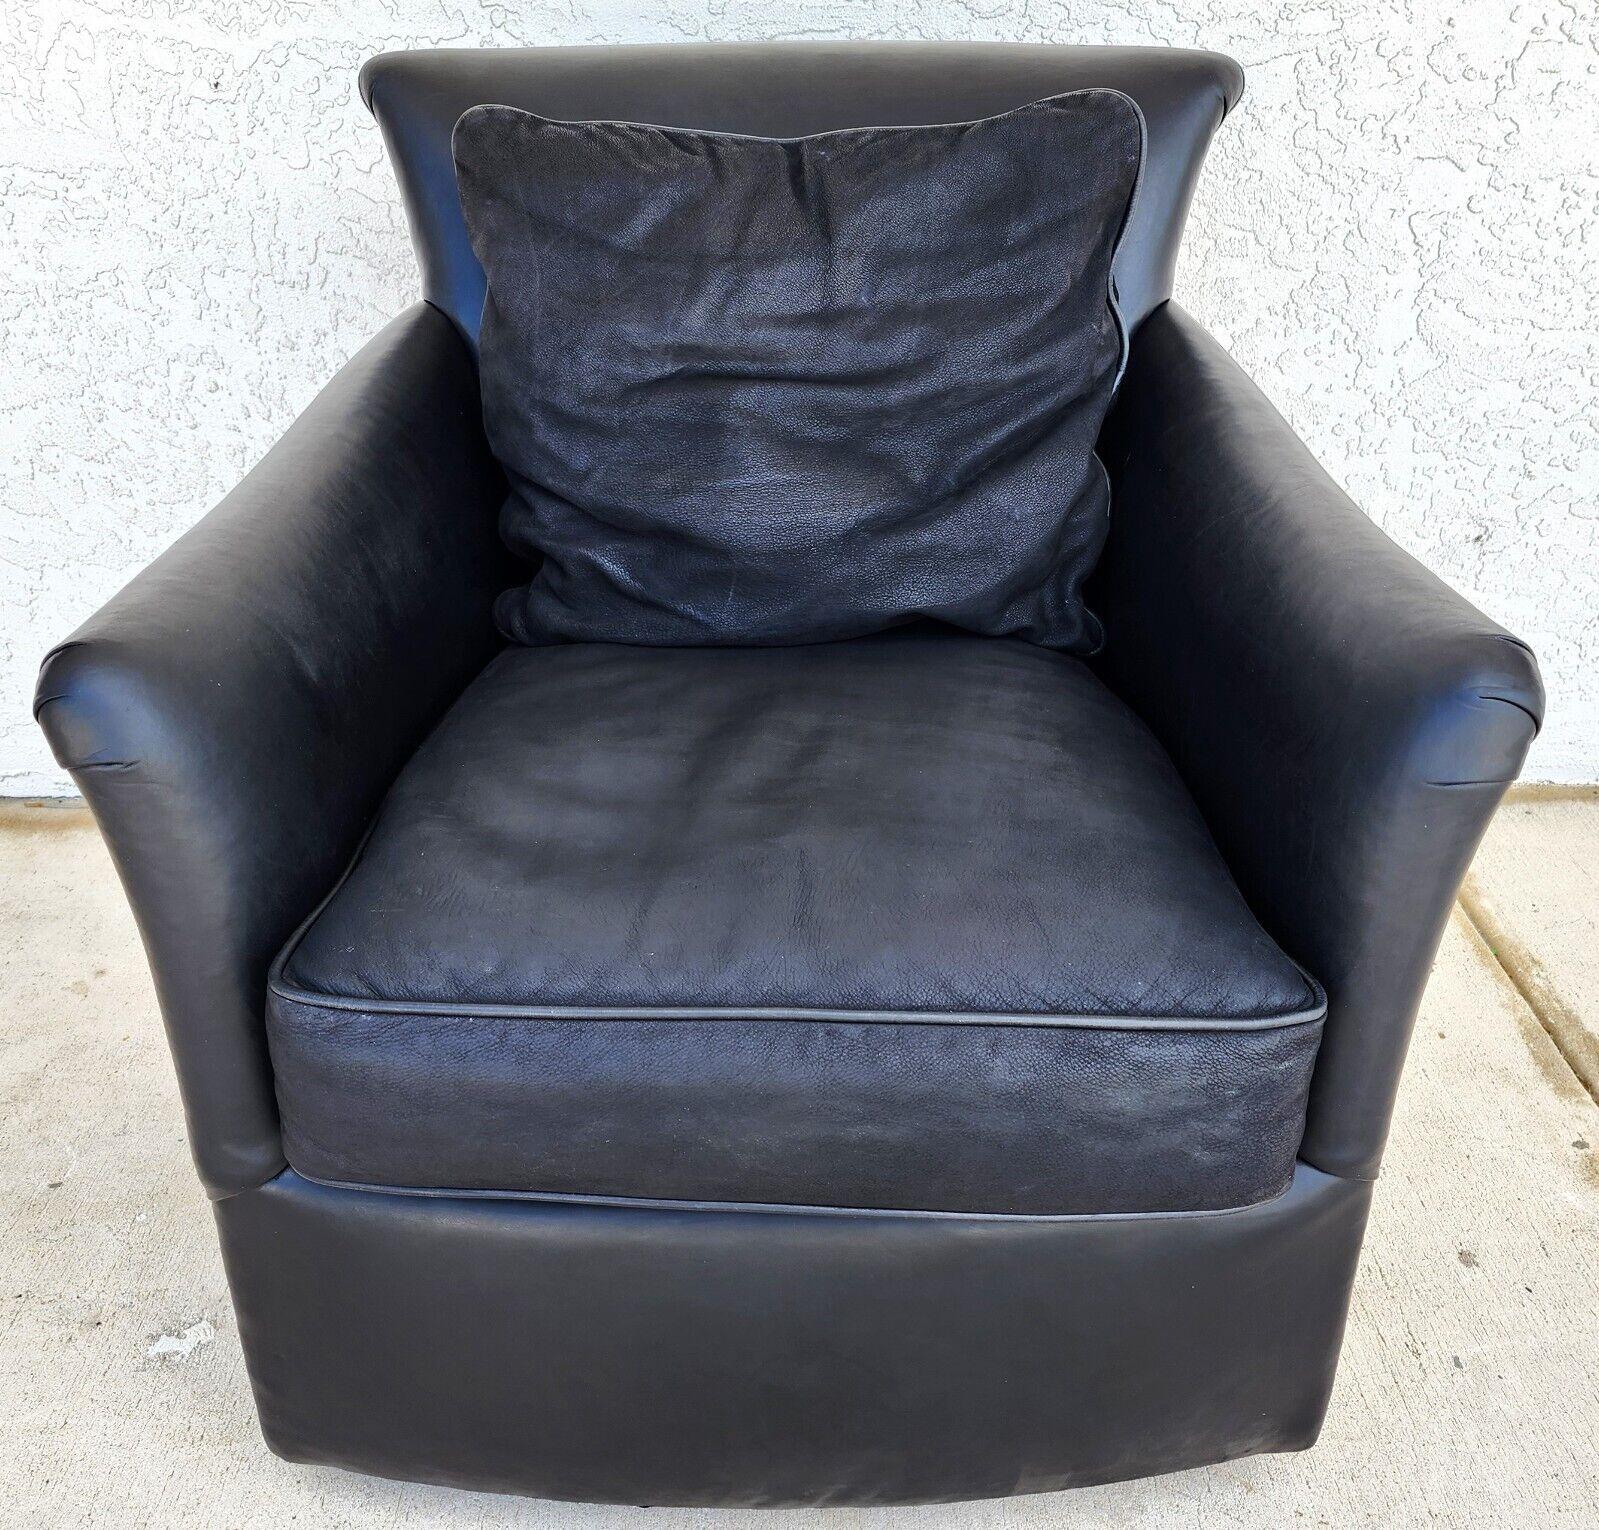 For FULL item description click on CONTINUE READING at the bottom of this page.

Offering One Of Our Recent Palm Beach Estate Fine Furniture Acquisitions Of A
Vintage MCM Leather Club Chair by Century Furniture Co
With a full 360 swivel and a down